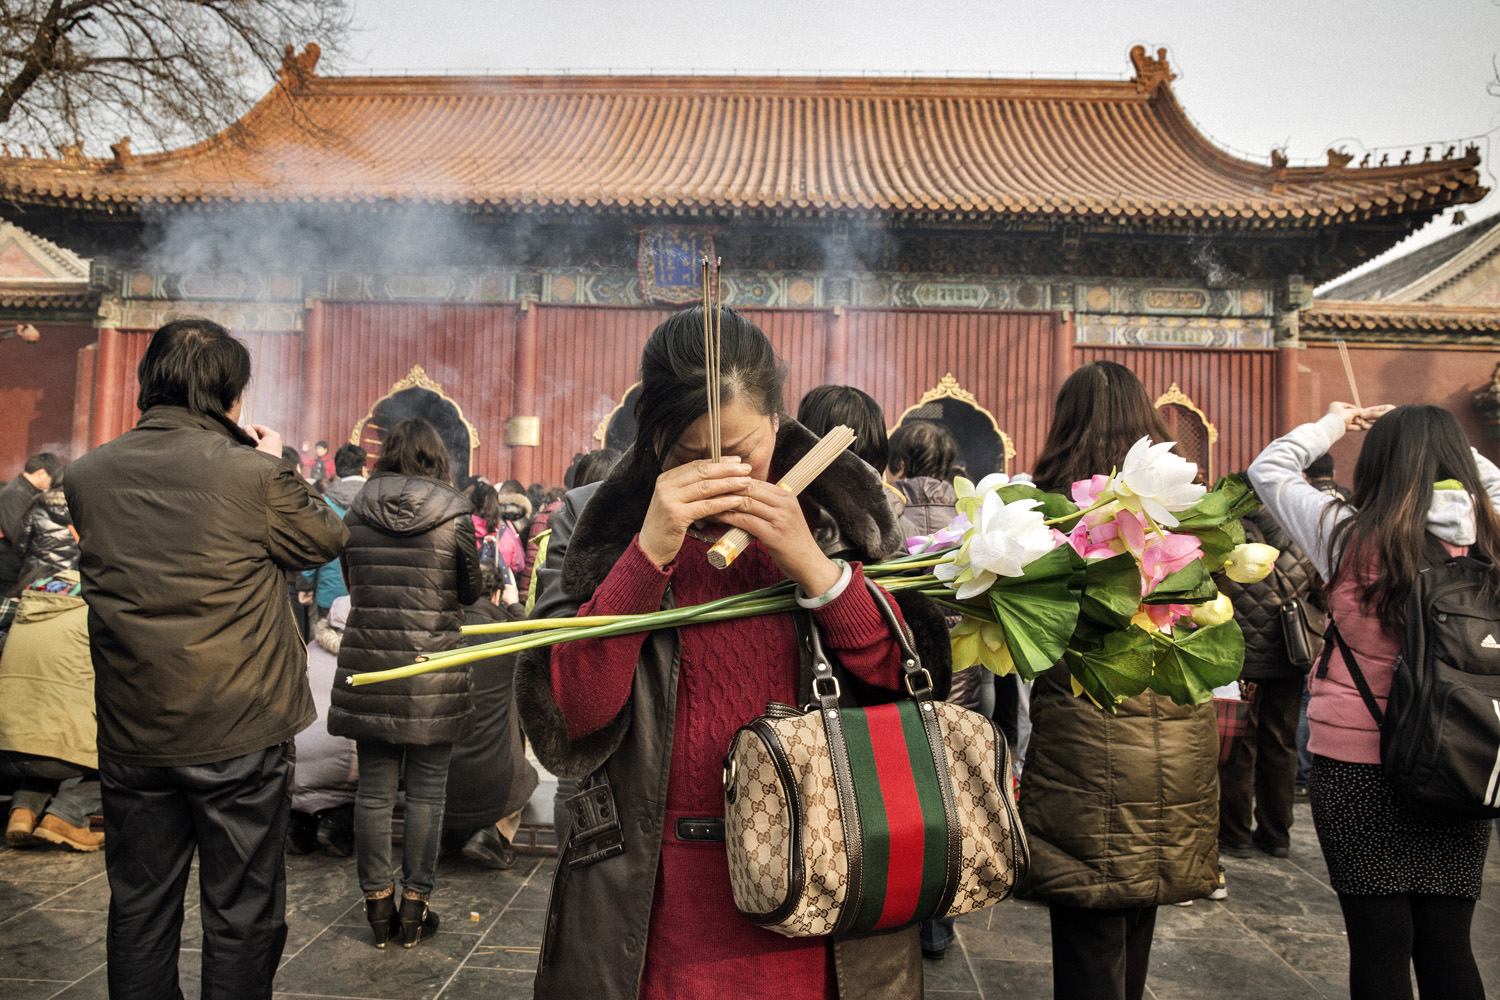 Han Chinese devotees offer incense at the Lama Tibetan Buddhist temple in Beijing on a Sunday morning earlier this year (Sim Chi Yin— VII Mentor Program for TIME)